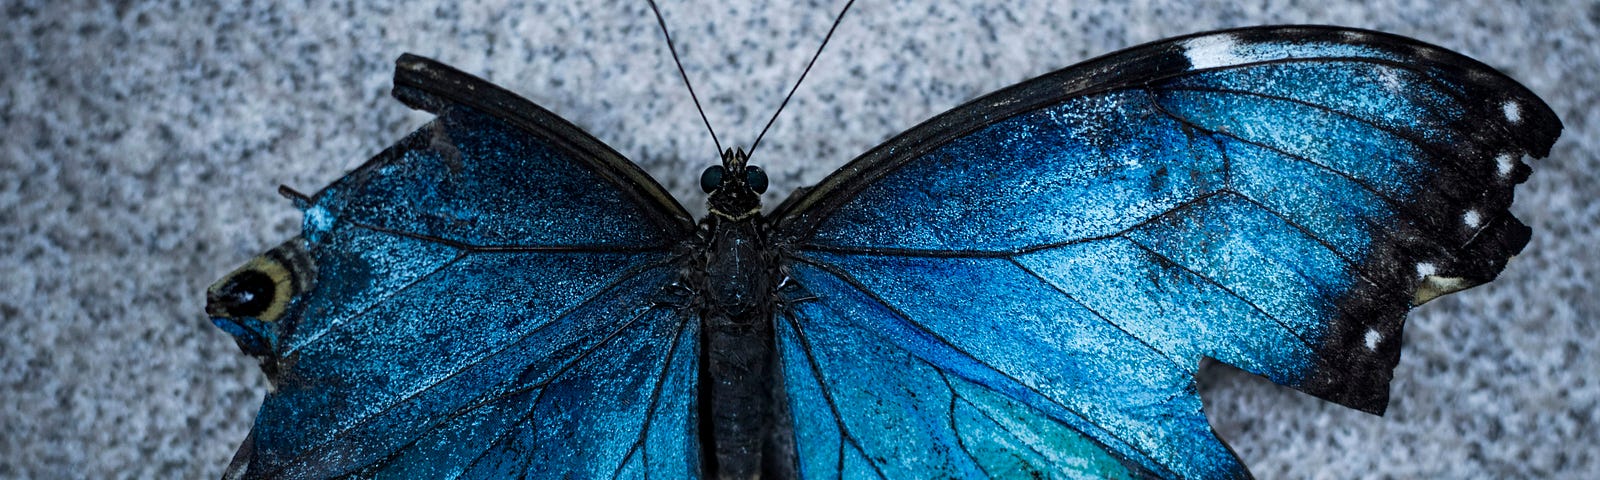 a blue butterfly with a torn wing on asphalt